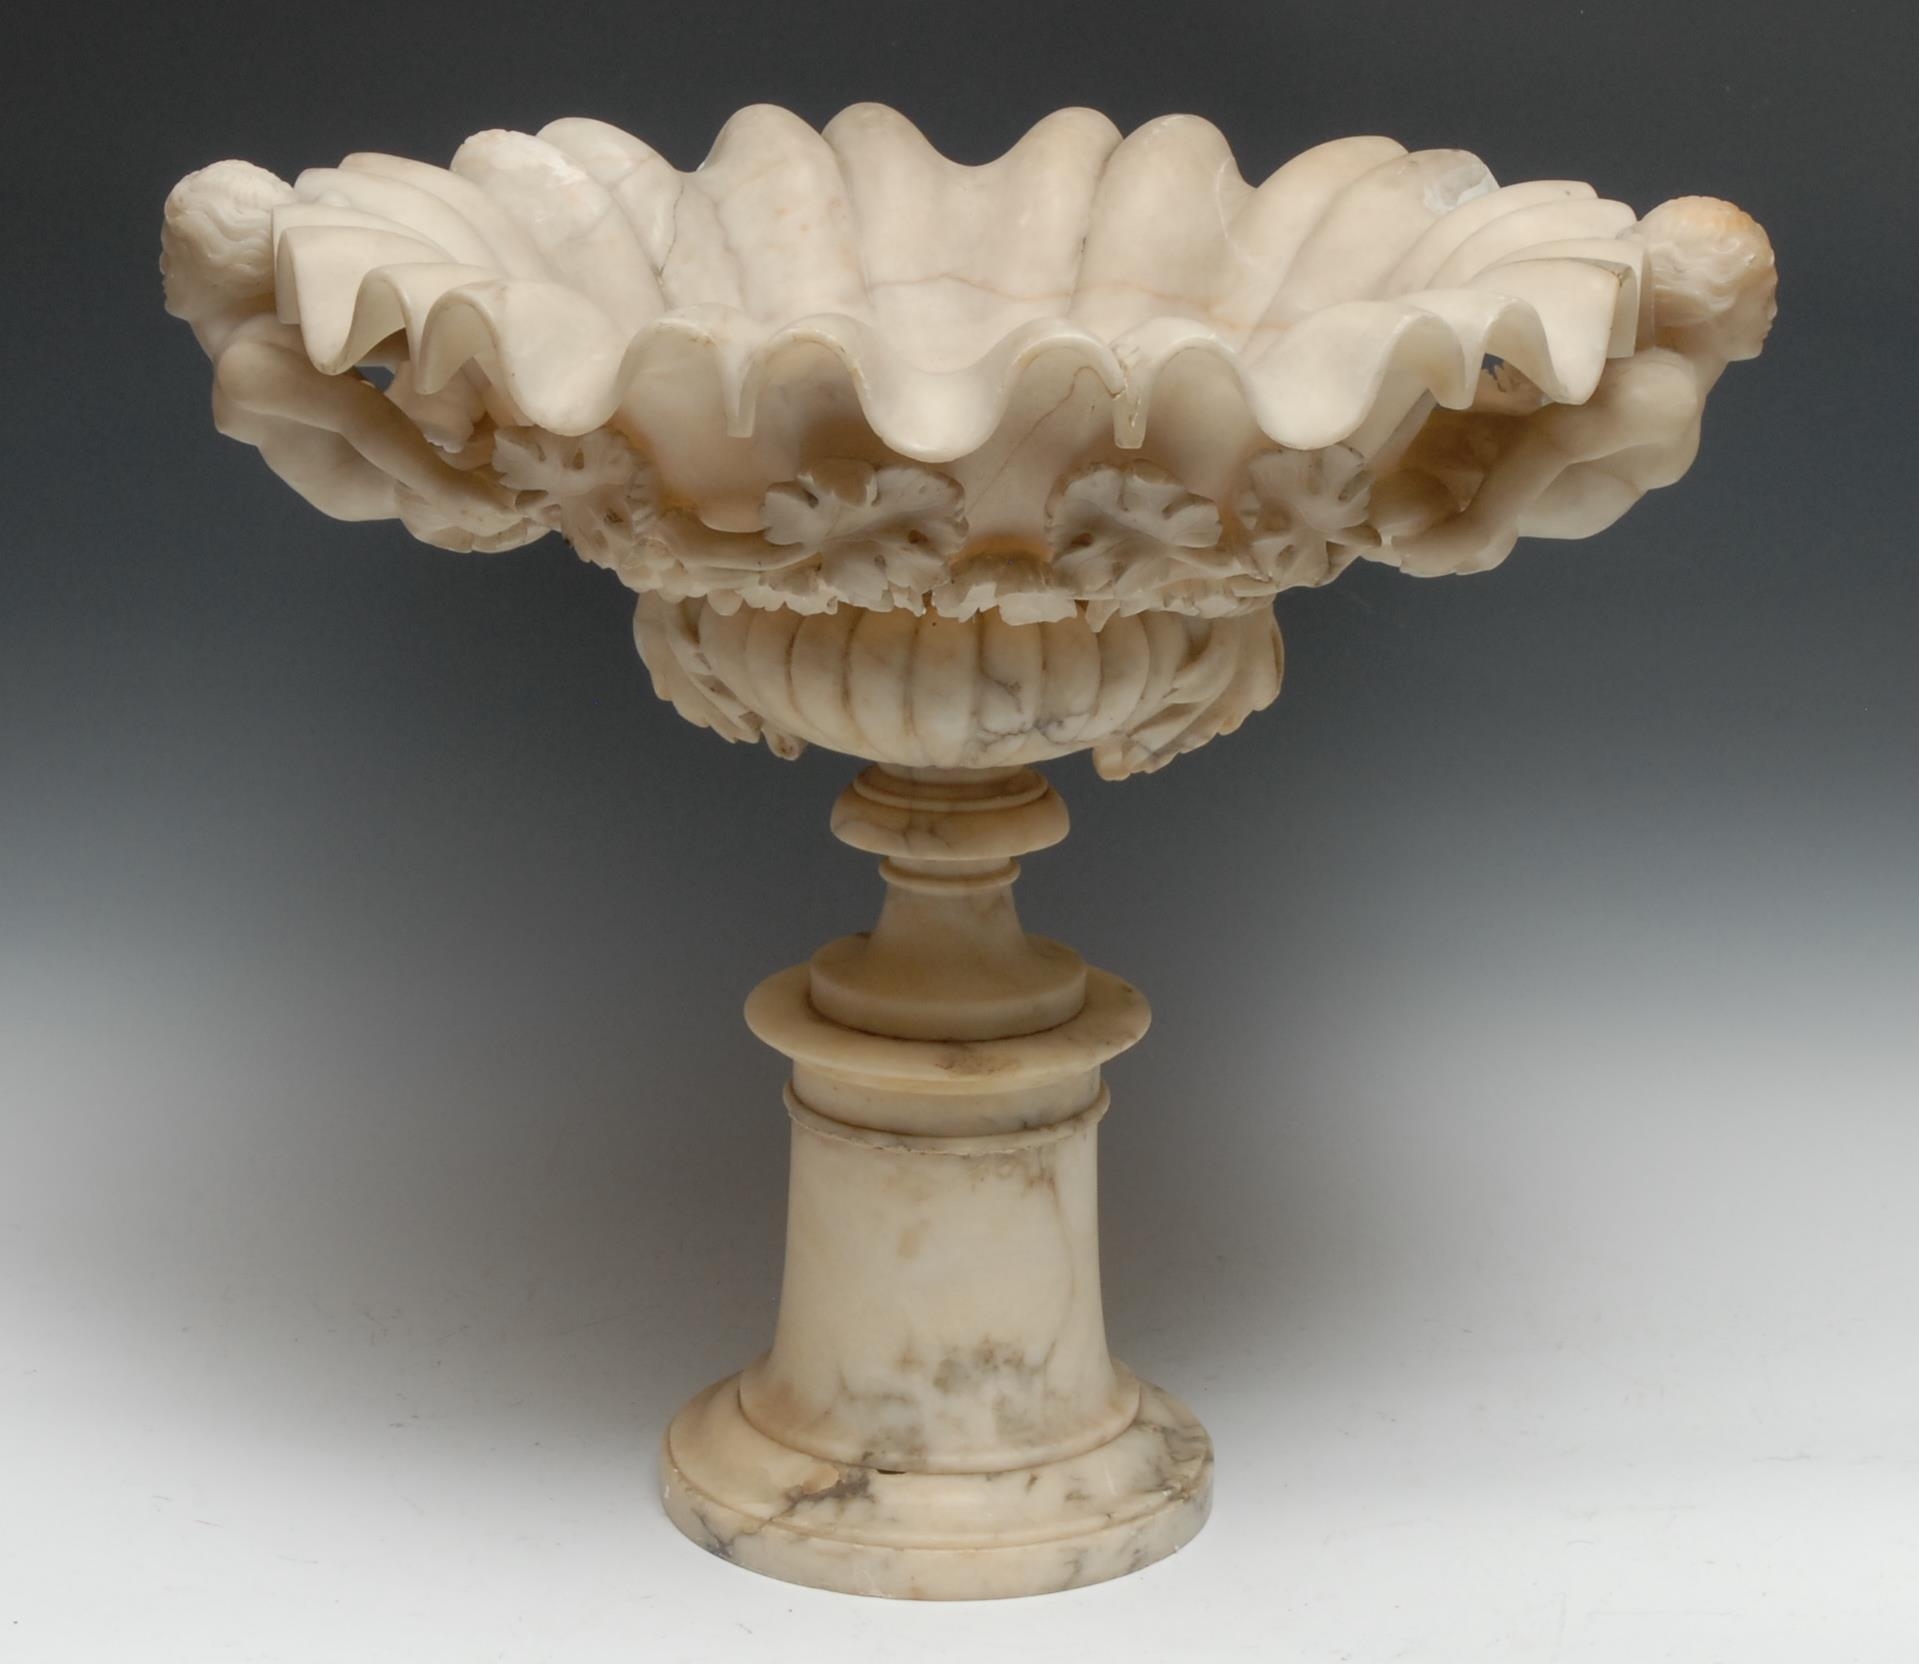 A 19th century alabaster sculptural table-centre, half-fluted scallop shell plateau carved with a